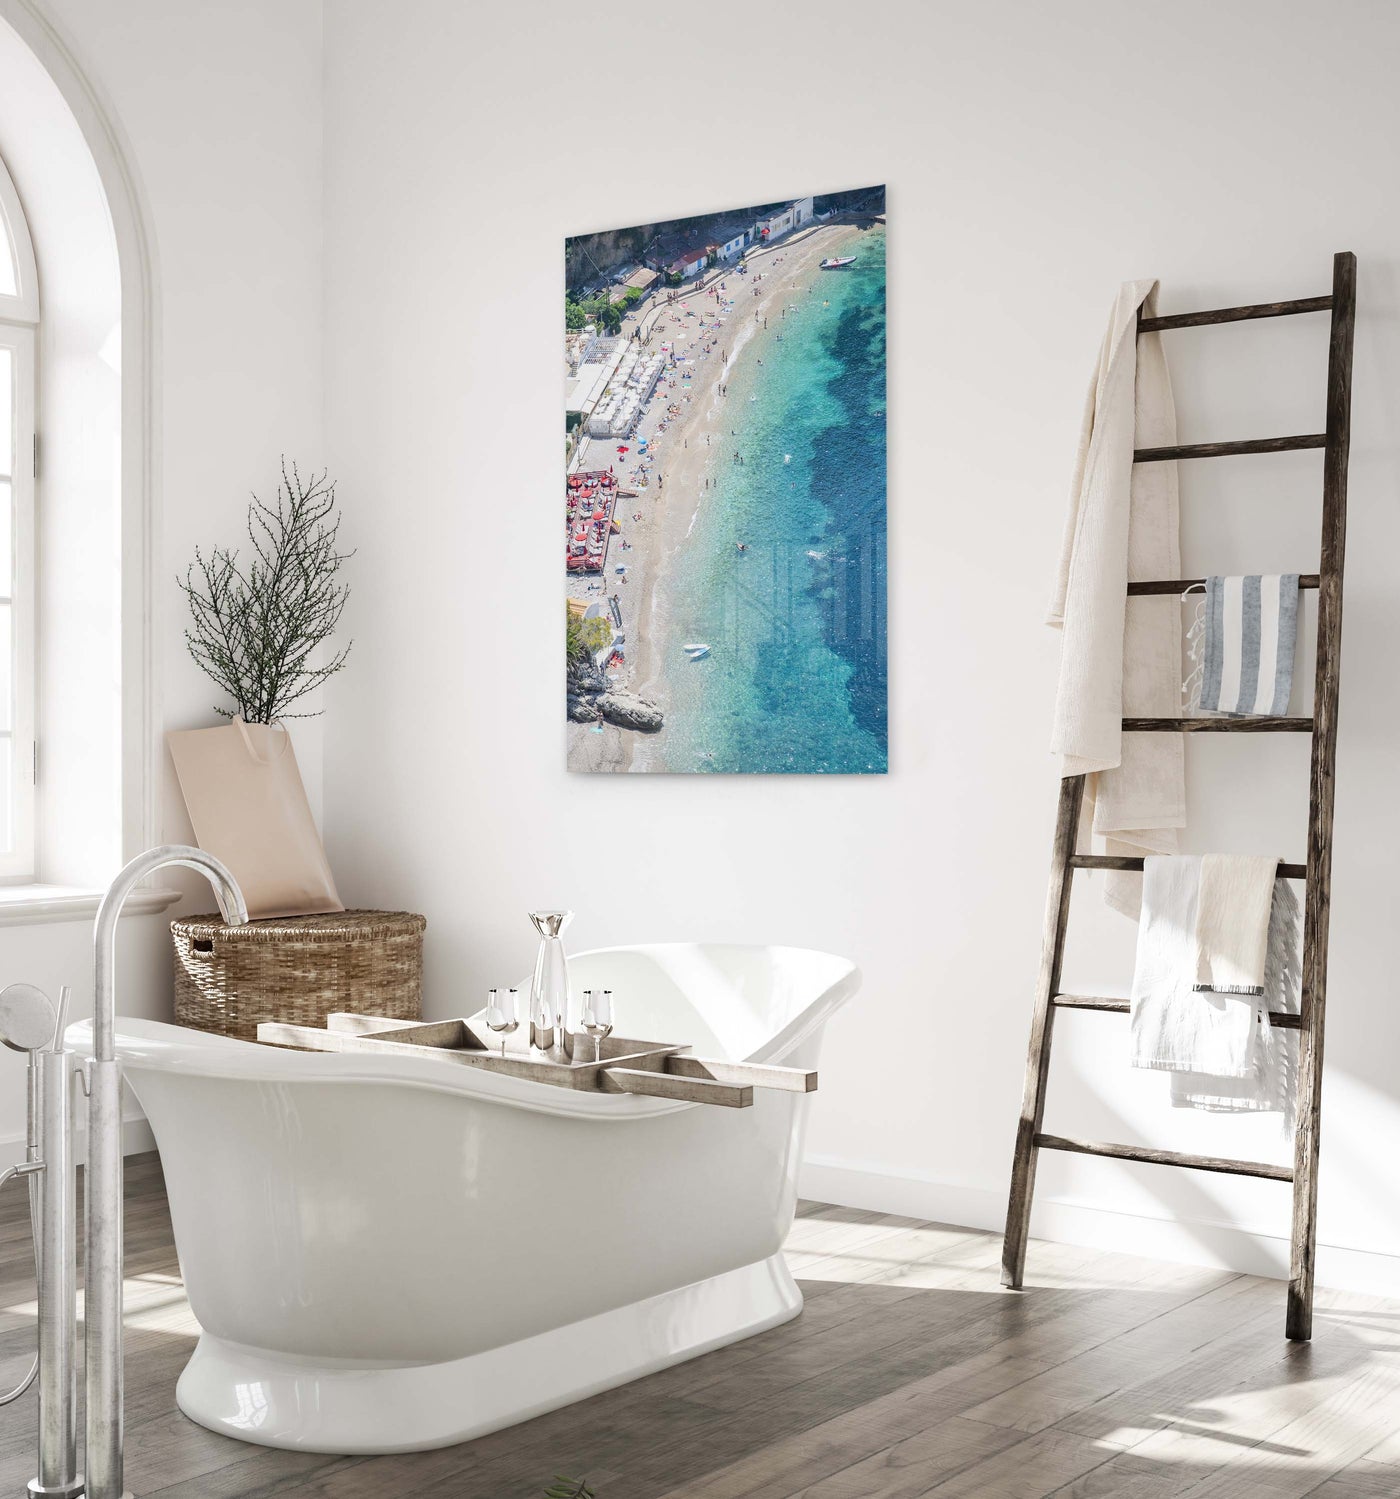 Plage Mala - Aerial view beach photography acrylic glass art print by Cattie Coyle Photography in bathroom